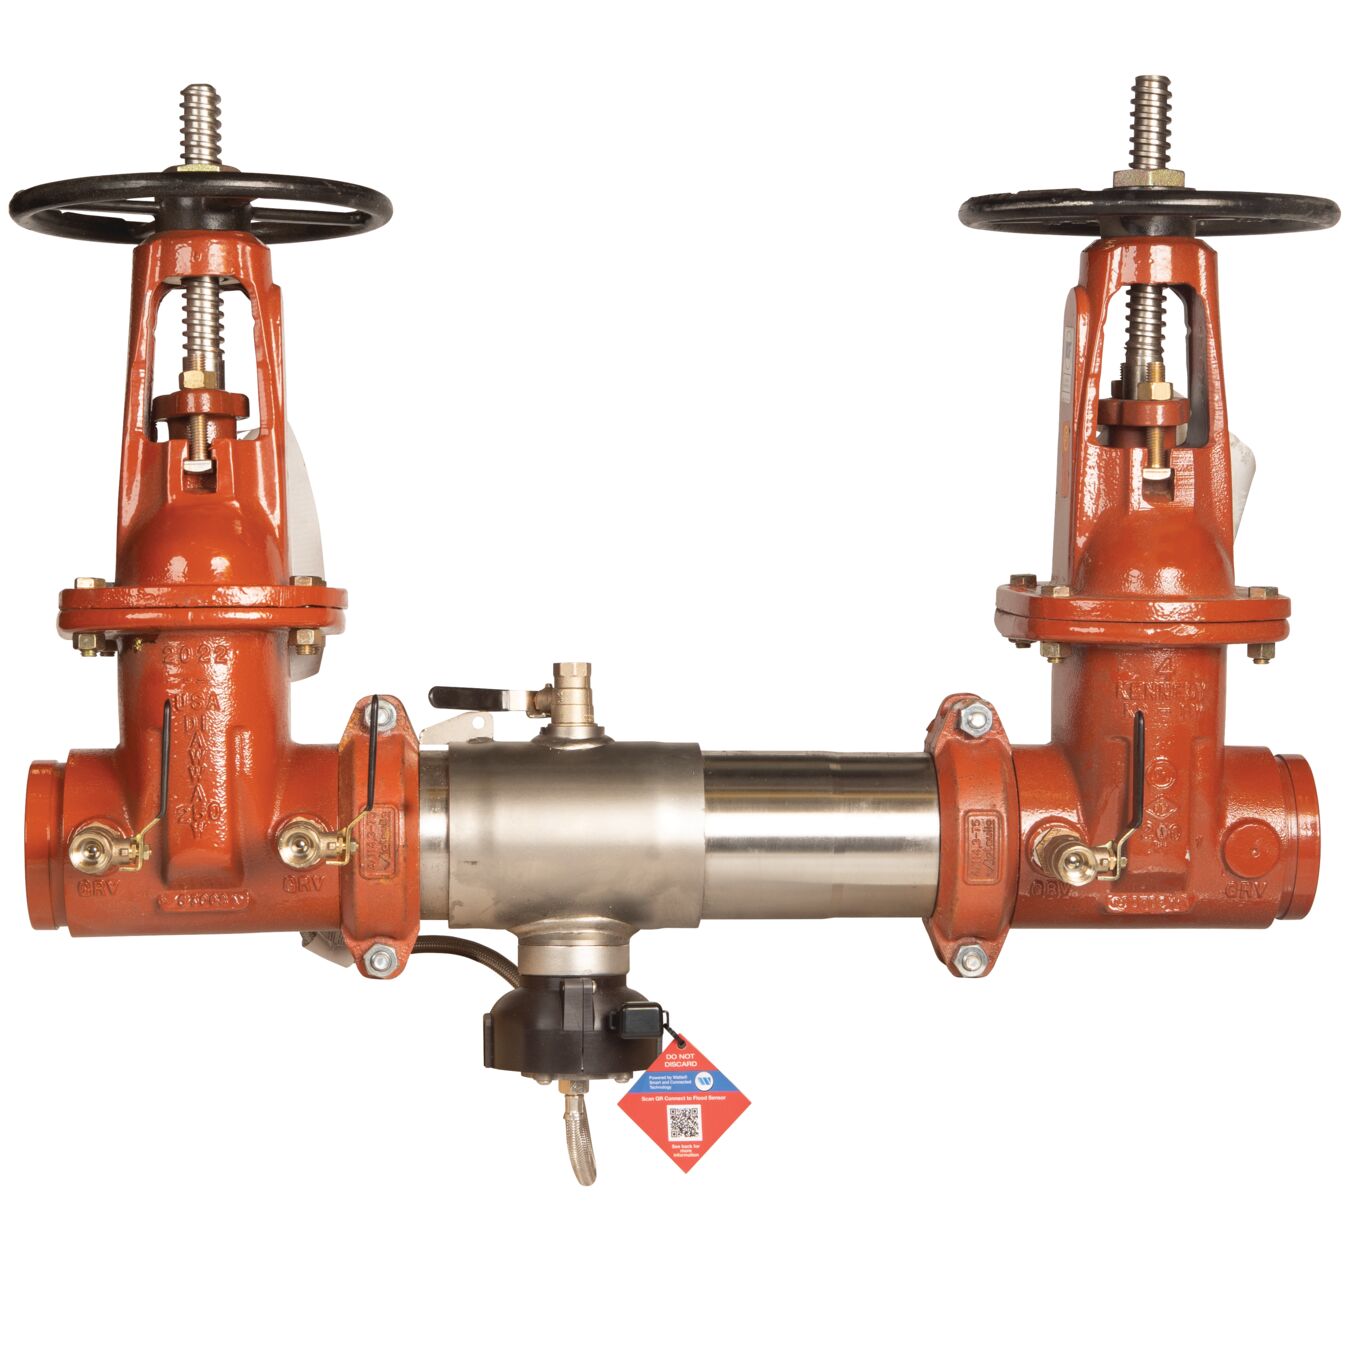 Reduced Pressure Valve Assembly Backflow Preventer, OSY Groove x Groove Gates and Flood Sensor